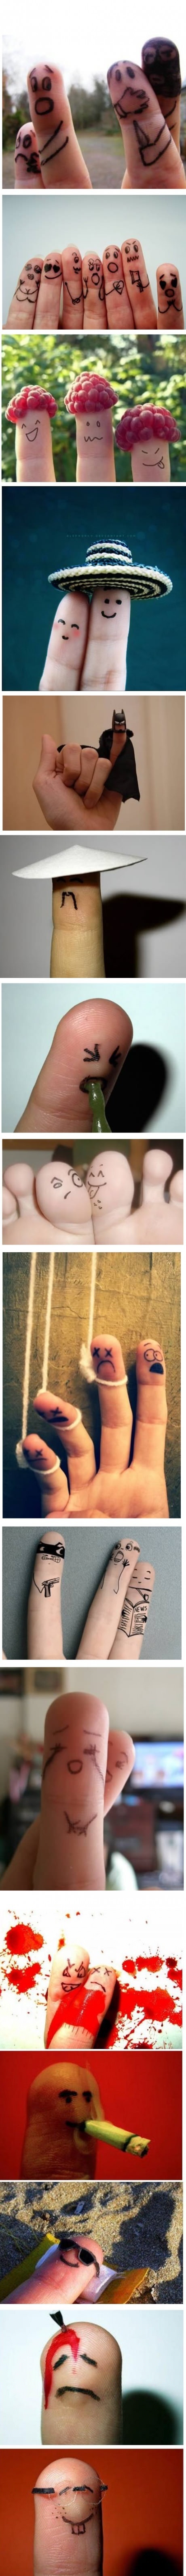 Pictures of funny fingers